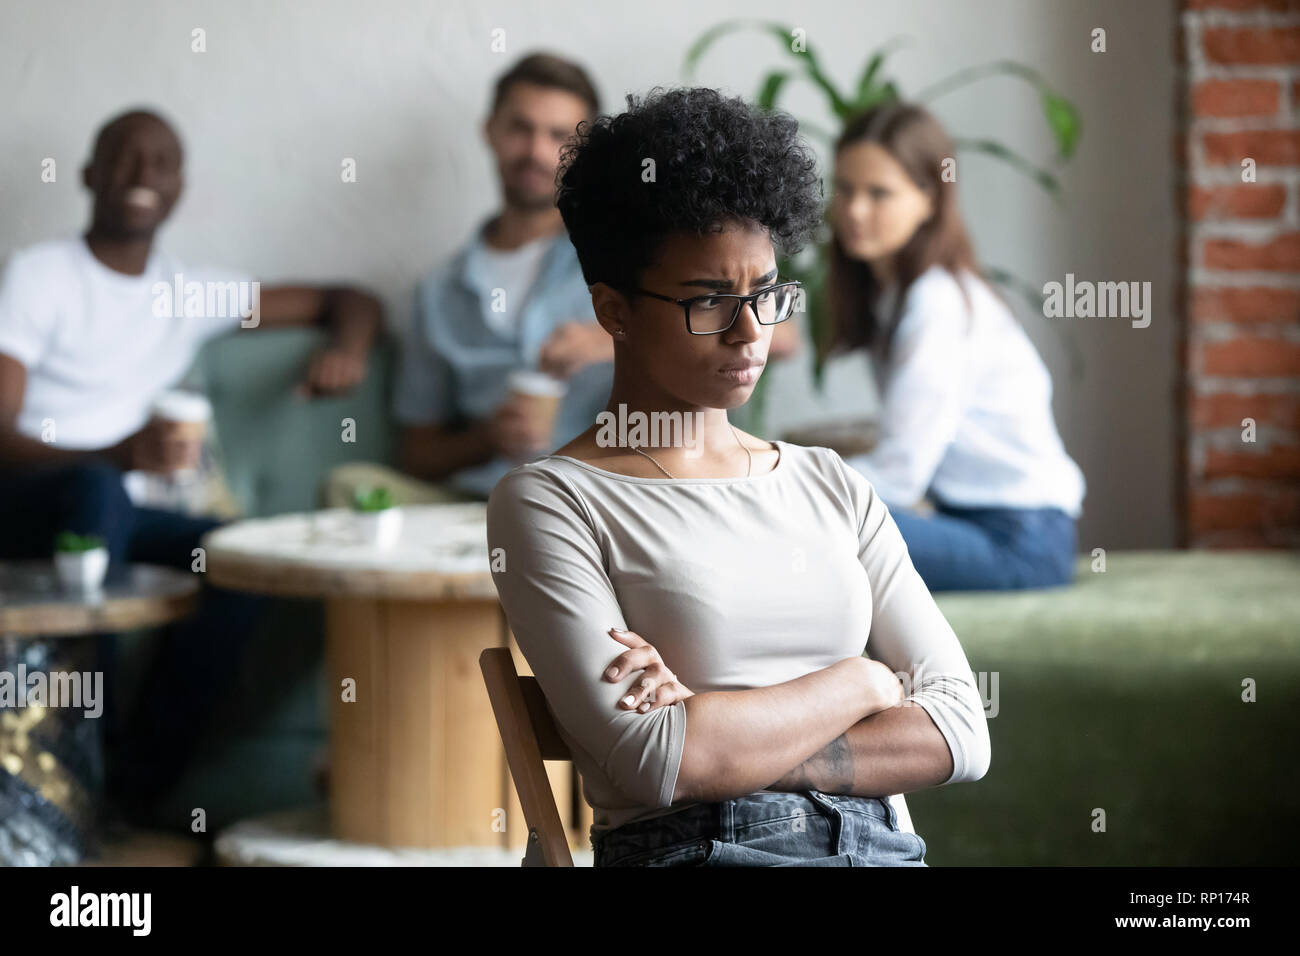 Black girl outcast sitting apart from peers in cafeteria Stock Photo